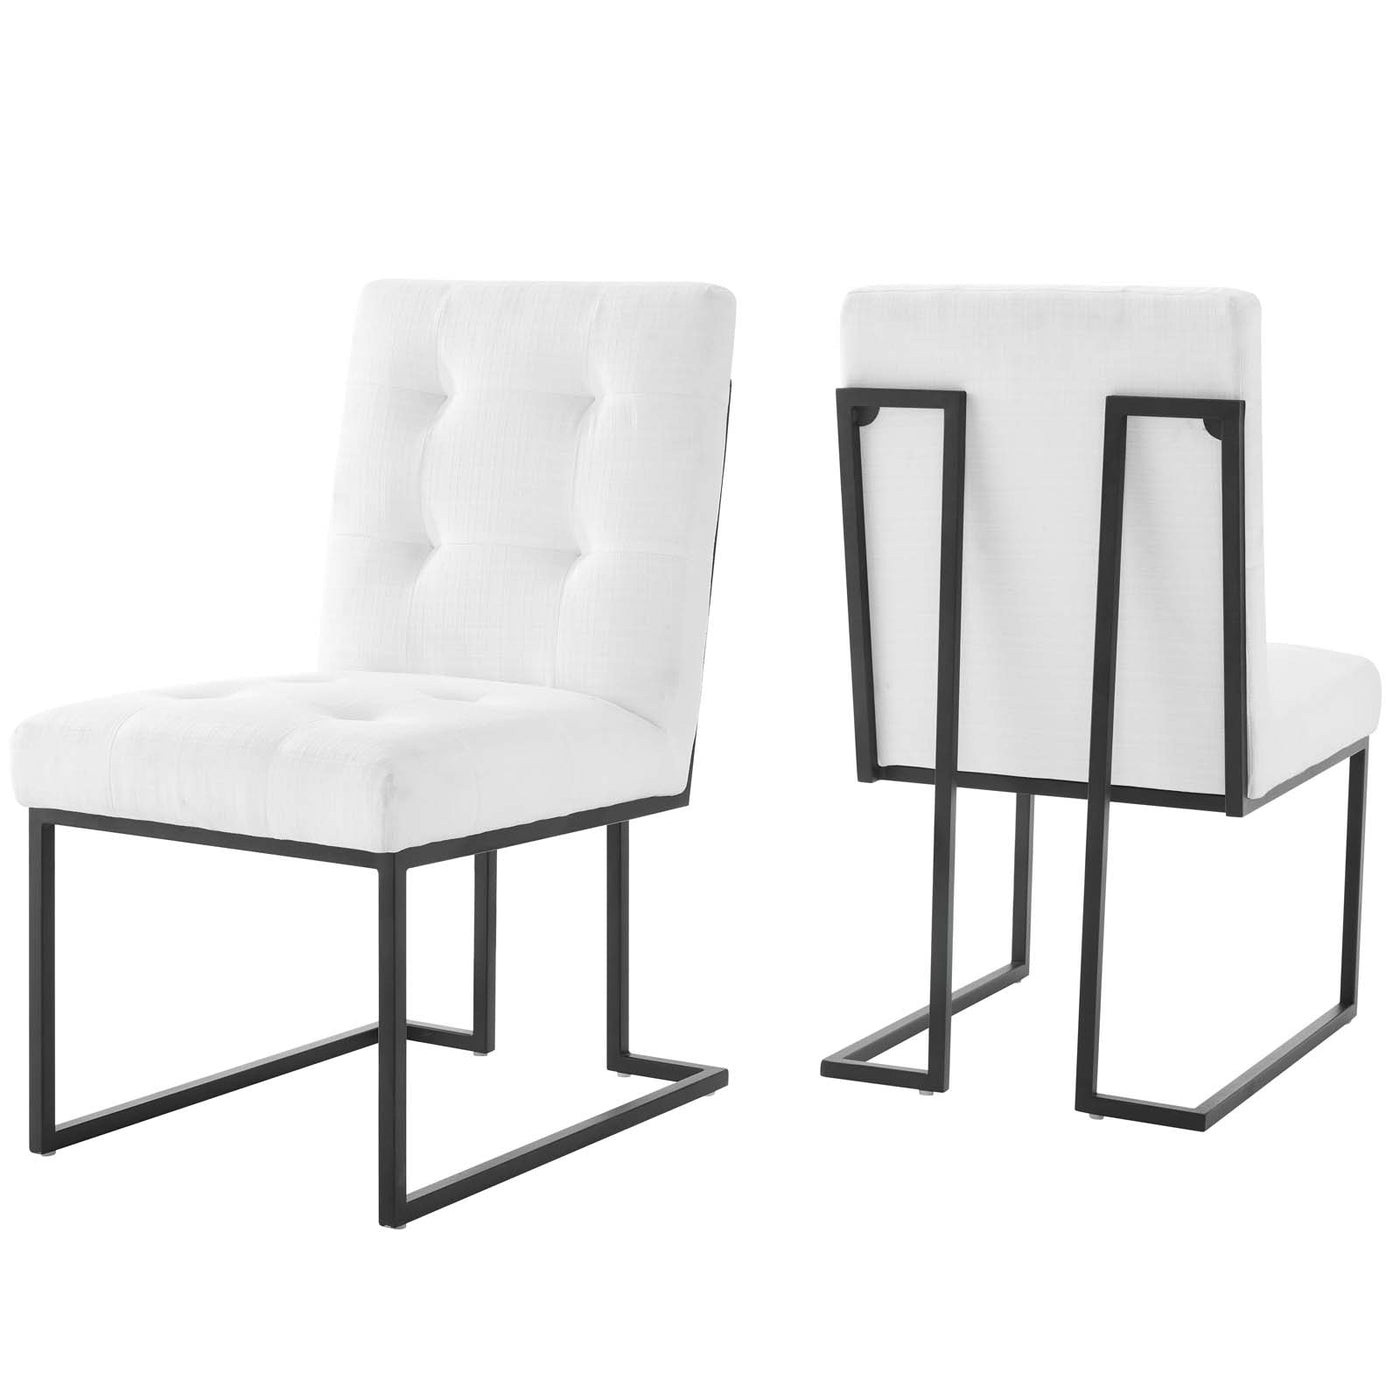 Privy Black Stainless Steel Upholstered Fabric Dining Chair Set of 2